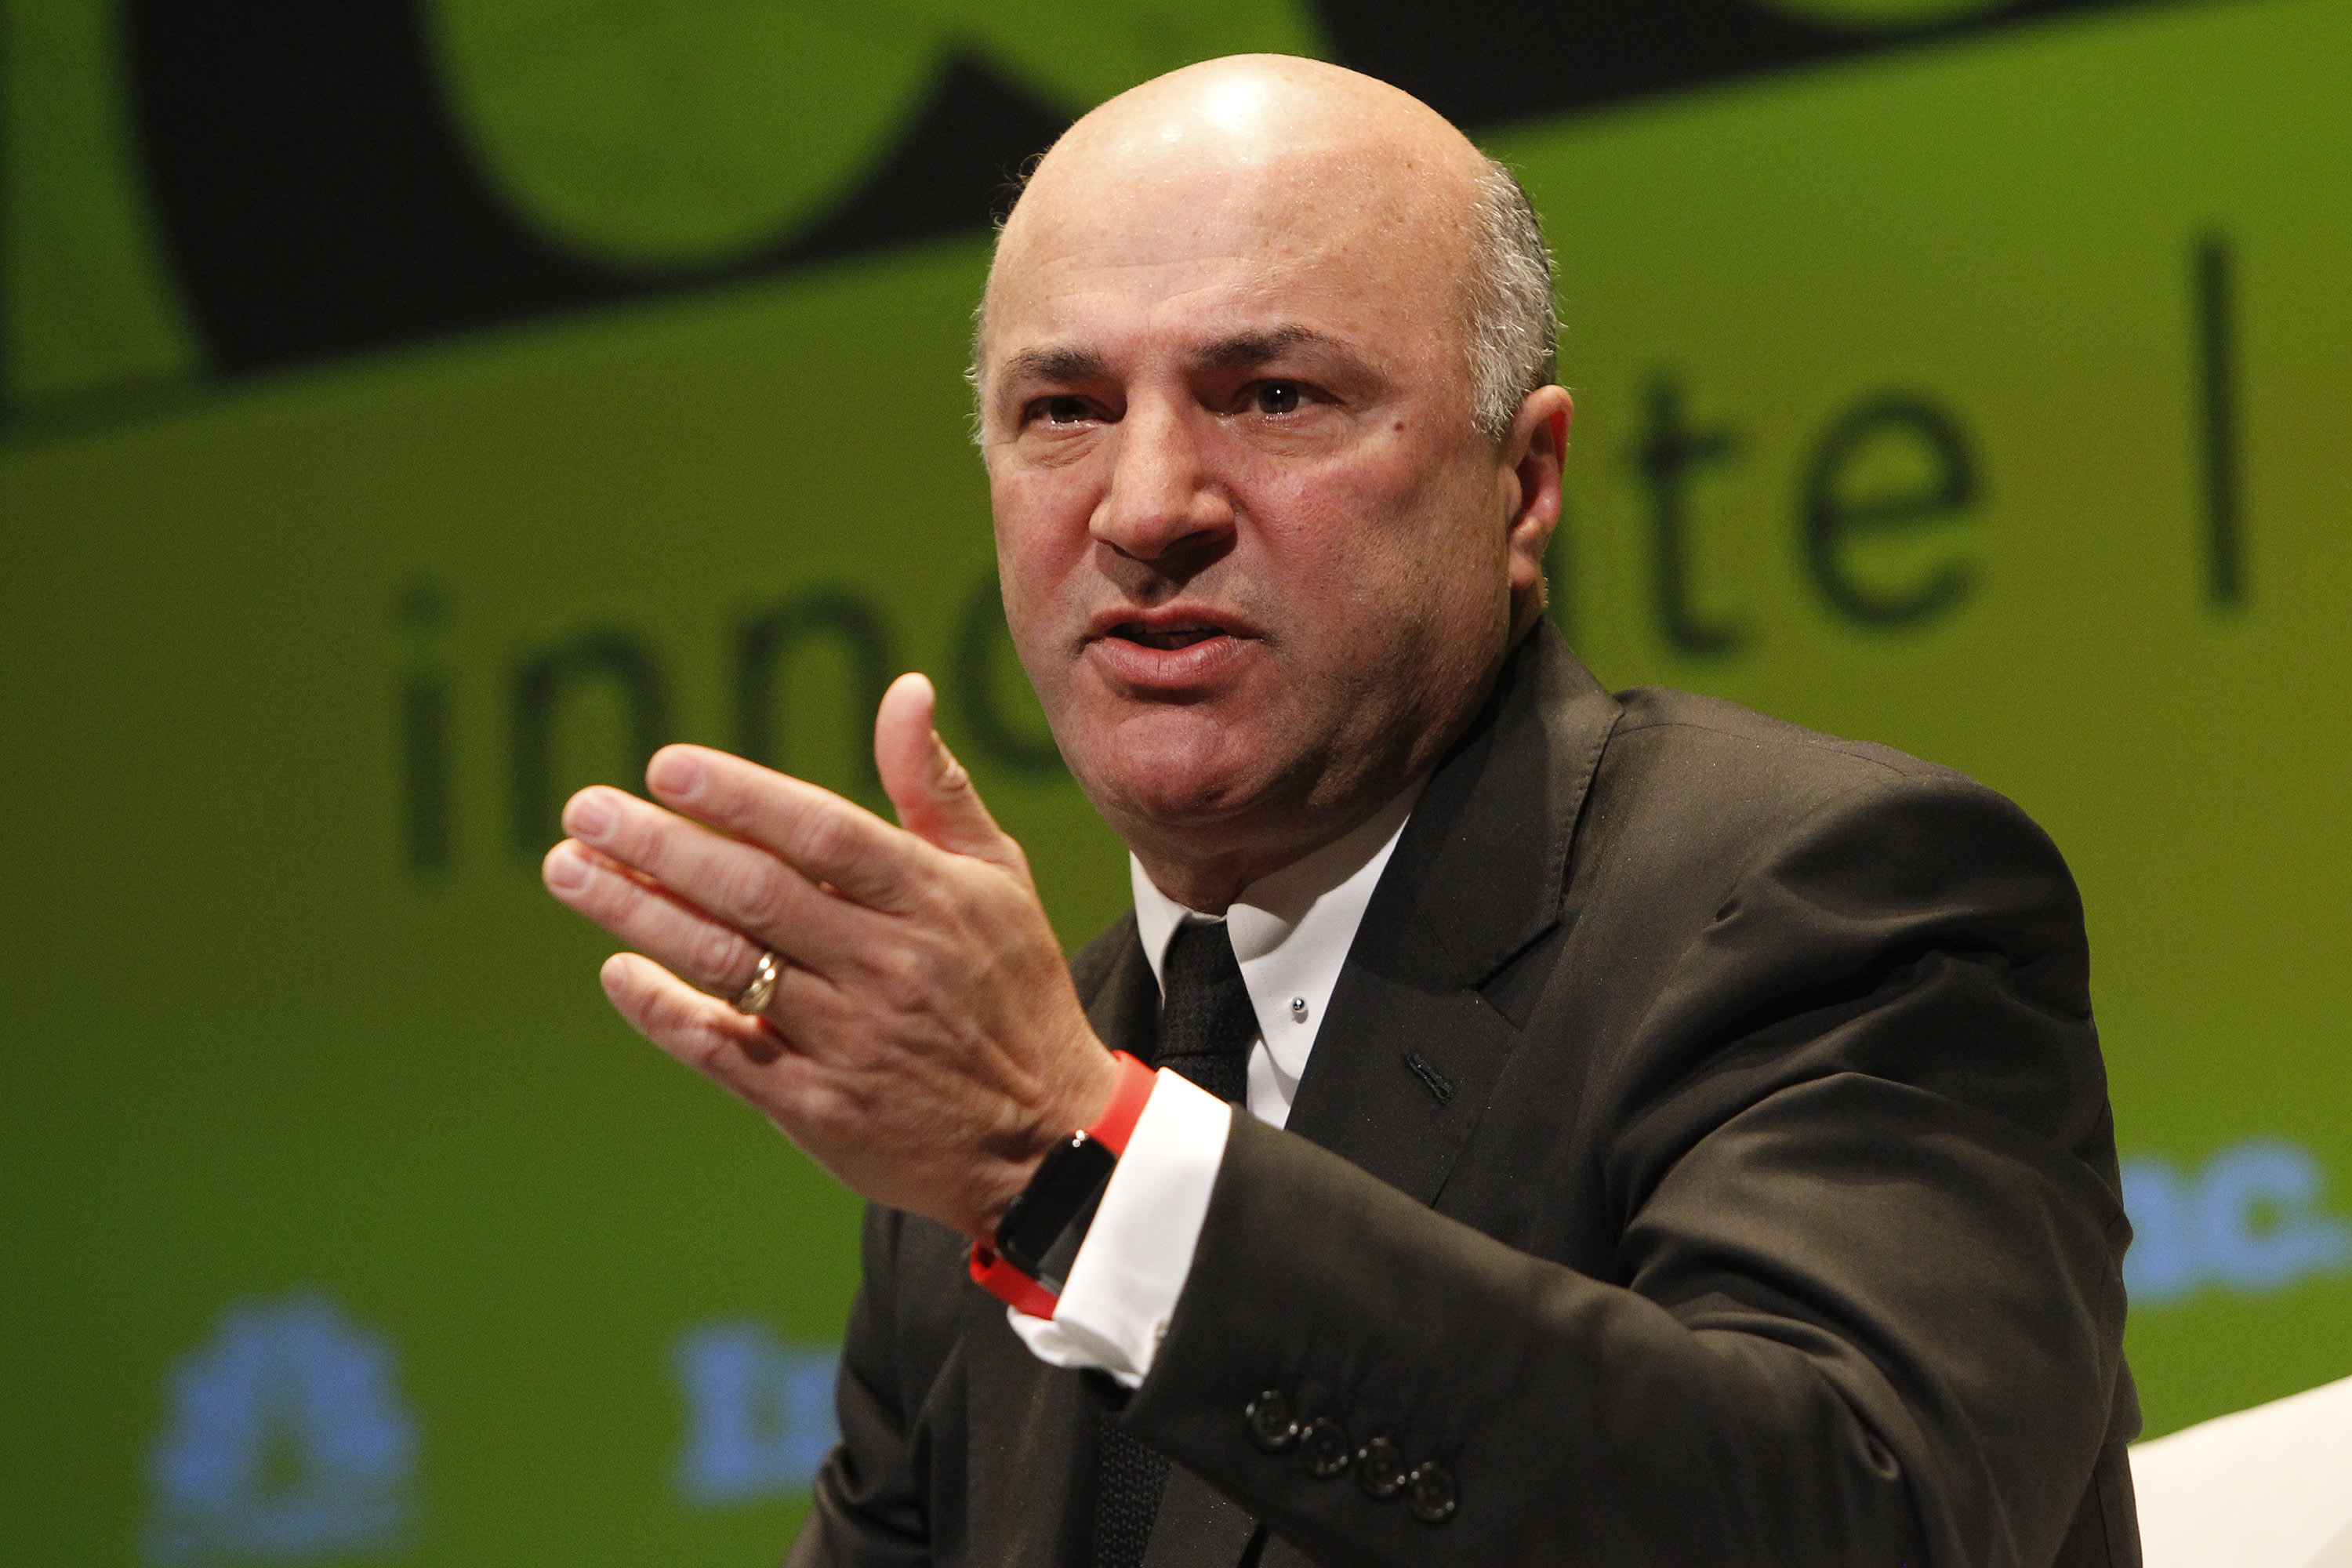 Kevin O'Leary says he's put 20% of his portfolio in crypto, including tokens and blockchain firms